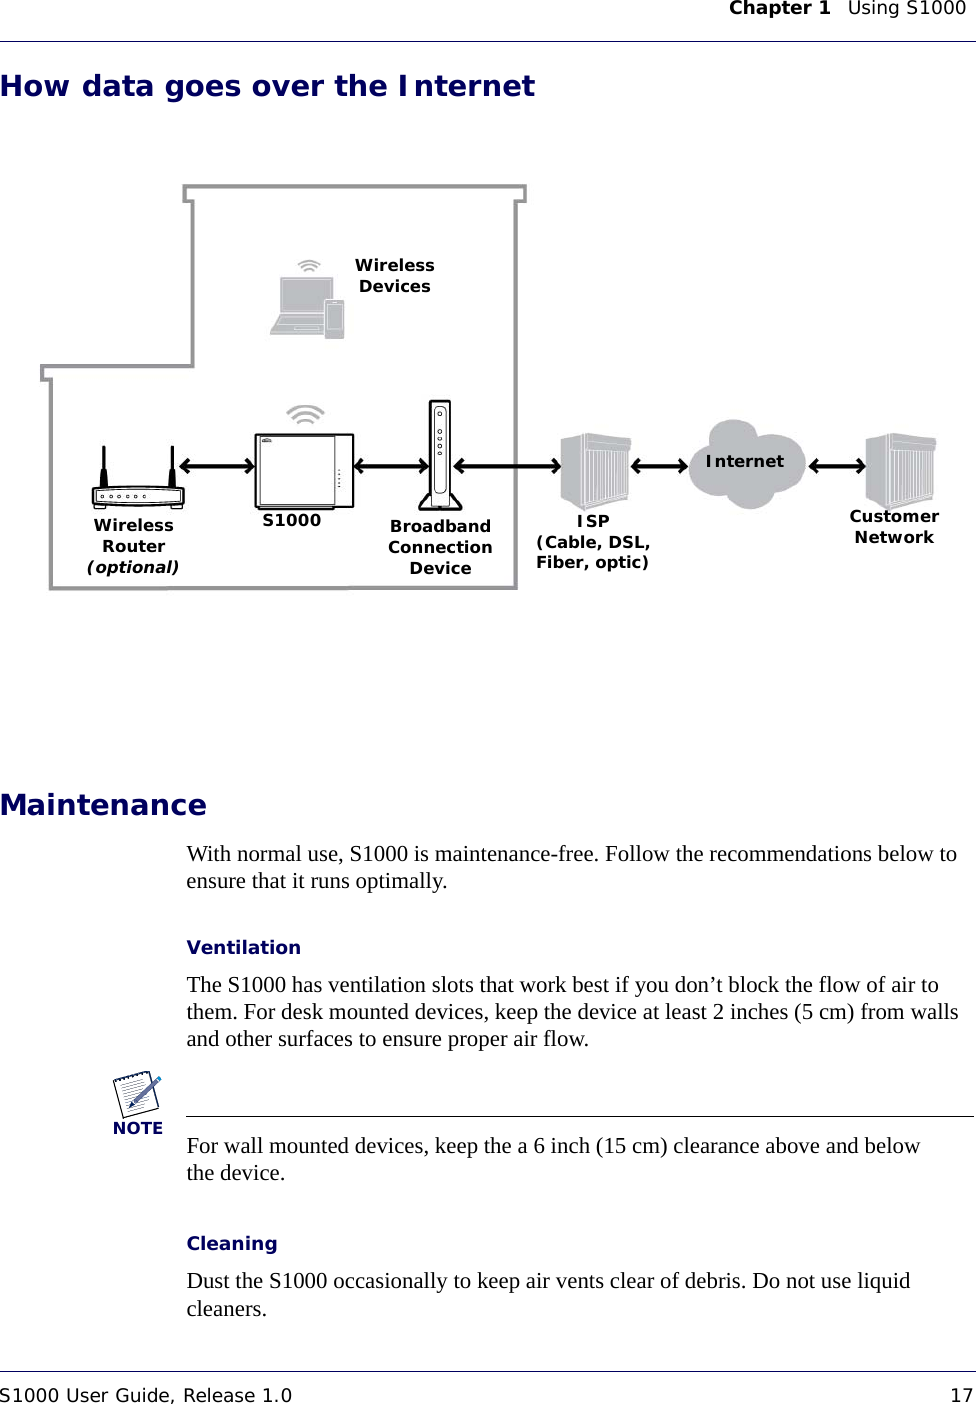 Chapter 1    Using S1000 S1000 User Guide, Release 1.0 17DRAFTHow data goes over the InternetWireless DevicesS1000Wireless Router (optional)Broadband Connection DeviceISP(Cable, DSL, Fiber, optic)InternetCustomer NetworkMaintenanceWith normal use, S1000 is maintenance-free. Follow the recommendations below to ensure that it runs optimally. VentilationThe S1000 has ventilation slots that work best if you don’t block the flow of air to them. For desk mounted devices, keep the device at least 2 inches (5 cm) from walls and other surfaces to ensure proper air flow. NOTEFor wall mounted devices, keep the a 6 inch (15 cm) clearance above and below the device.CleaningDust the S1000 occasionally to keep air vents clear of debris. Do not use liquid cleaners. 